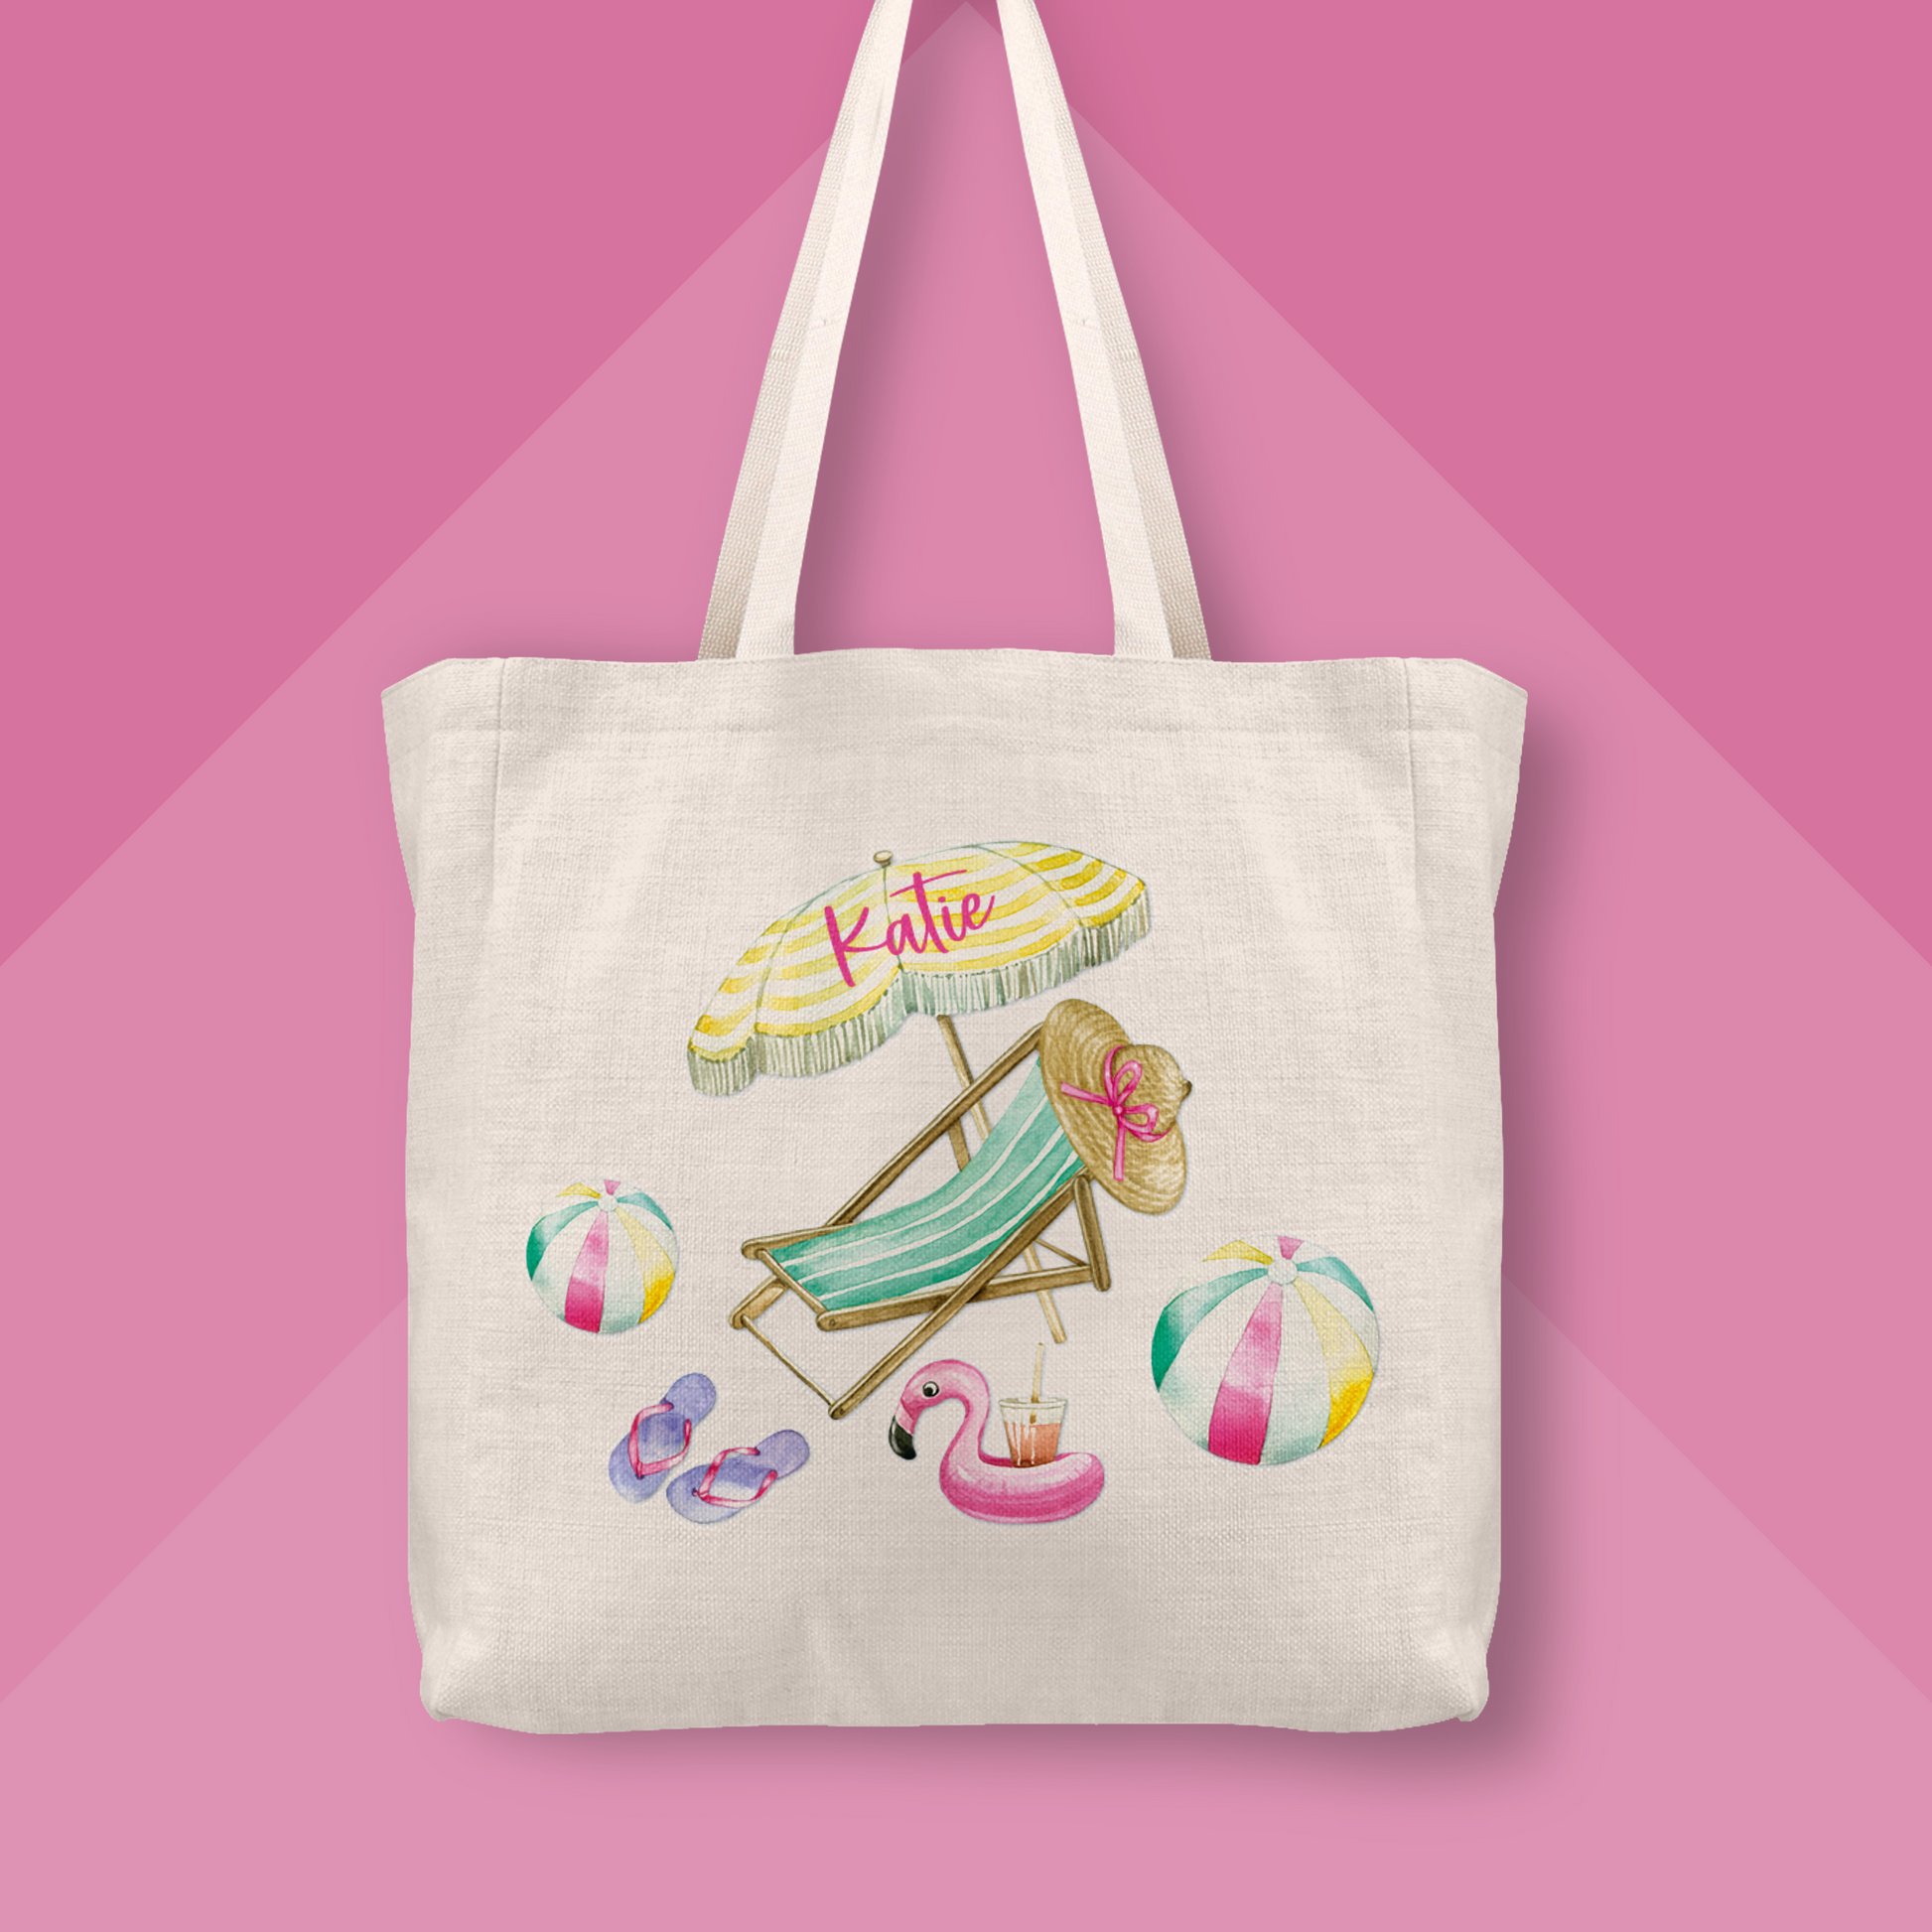 Summer Pool Party-Themed | Shopping Tote Bag | 15" x 15" x 5" | Personalized | S'Berry Boutique